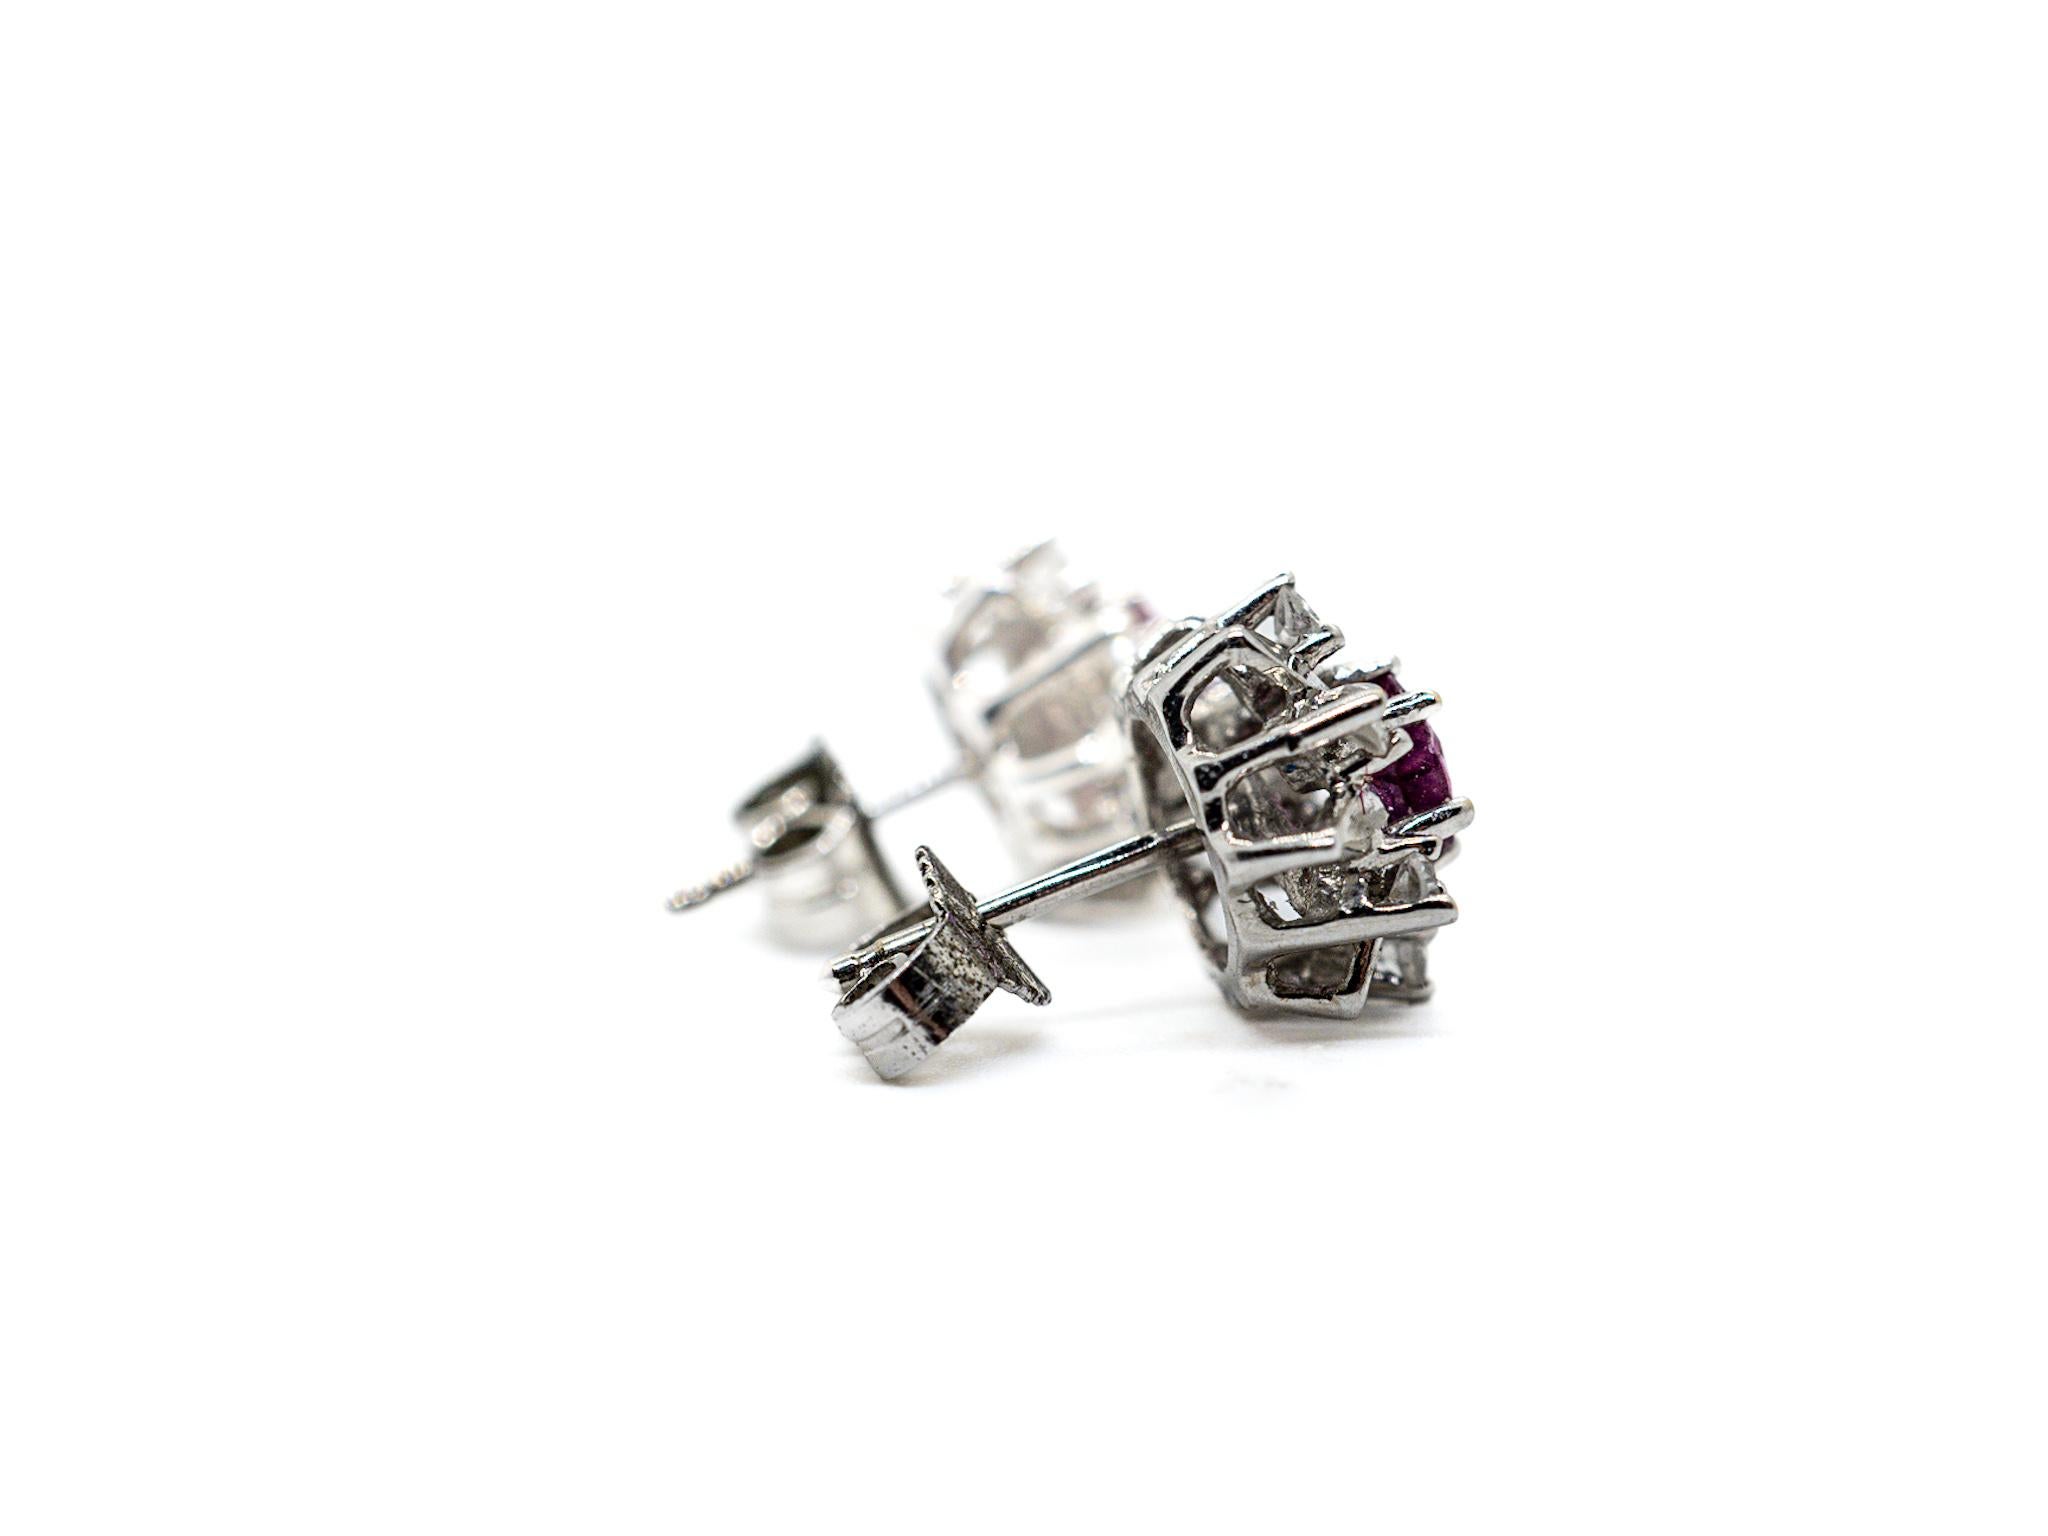 Introducing our exquisite Stud Earrings, crafted with exceptional precision and elegance. These stunning earrings are made of 18K white gold, radiating a contemporary and sophisticated allure.

The focal point of each earring is a captivating